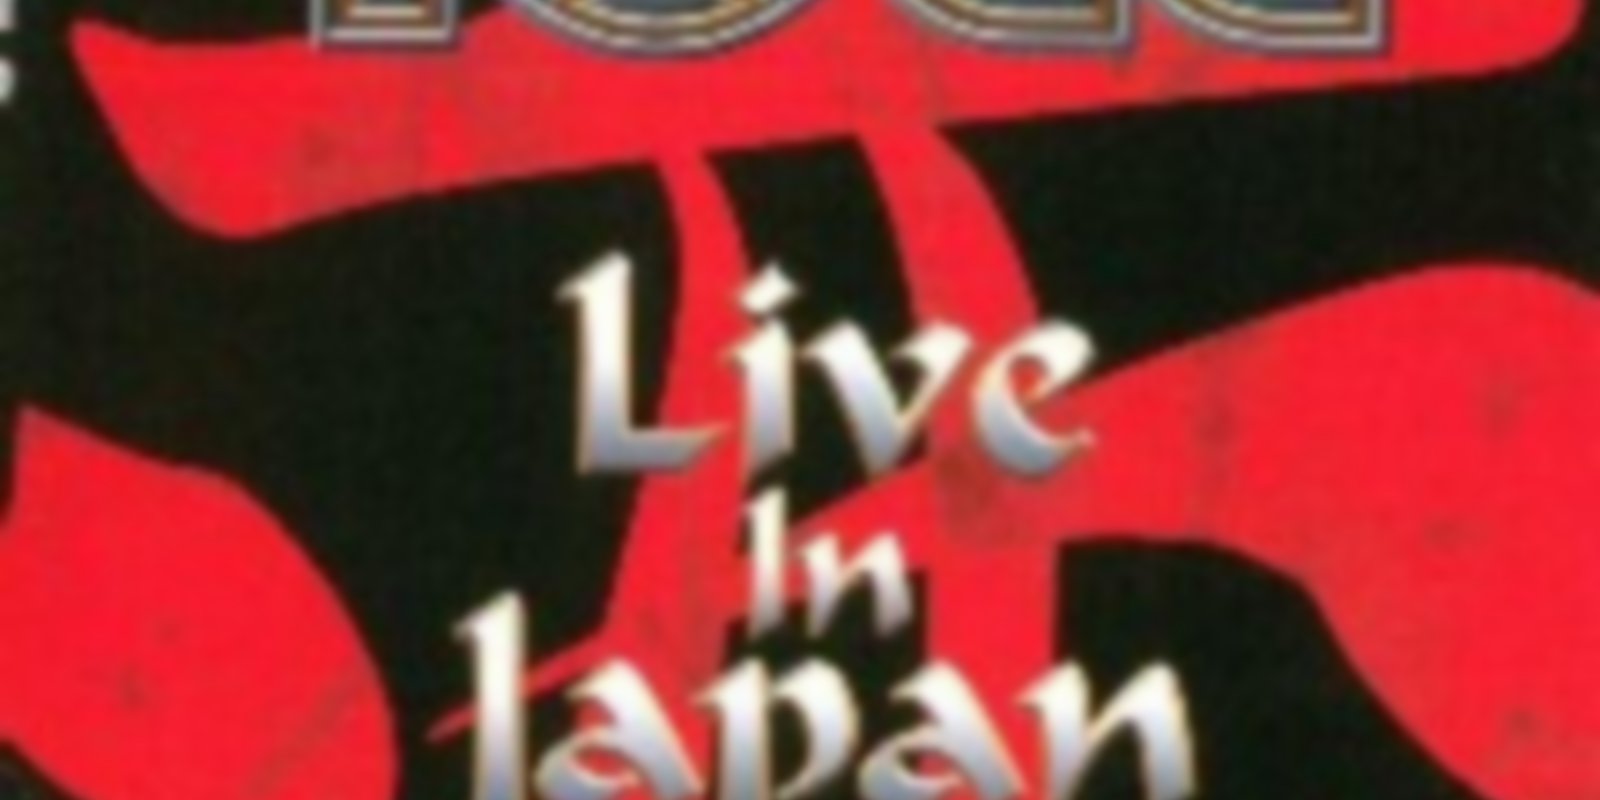 10 cc - Live in Japan